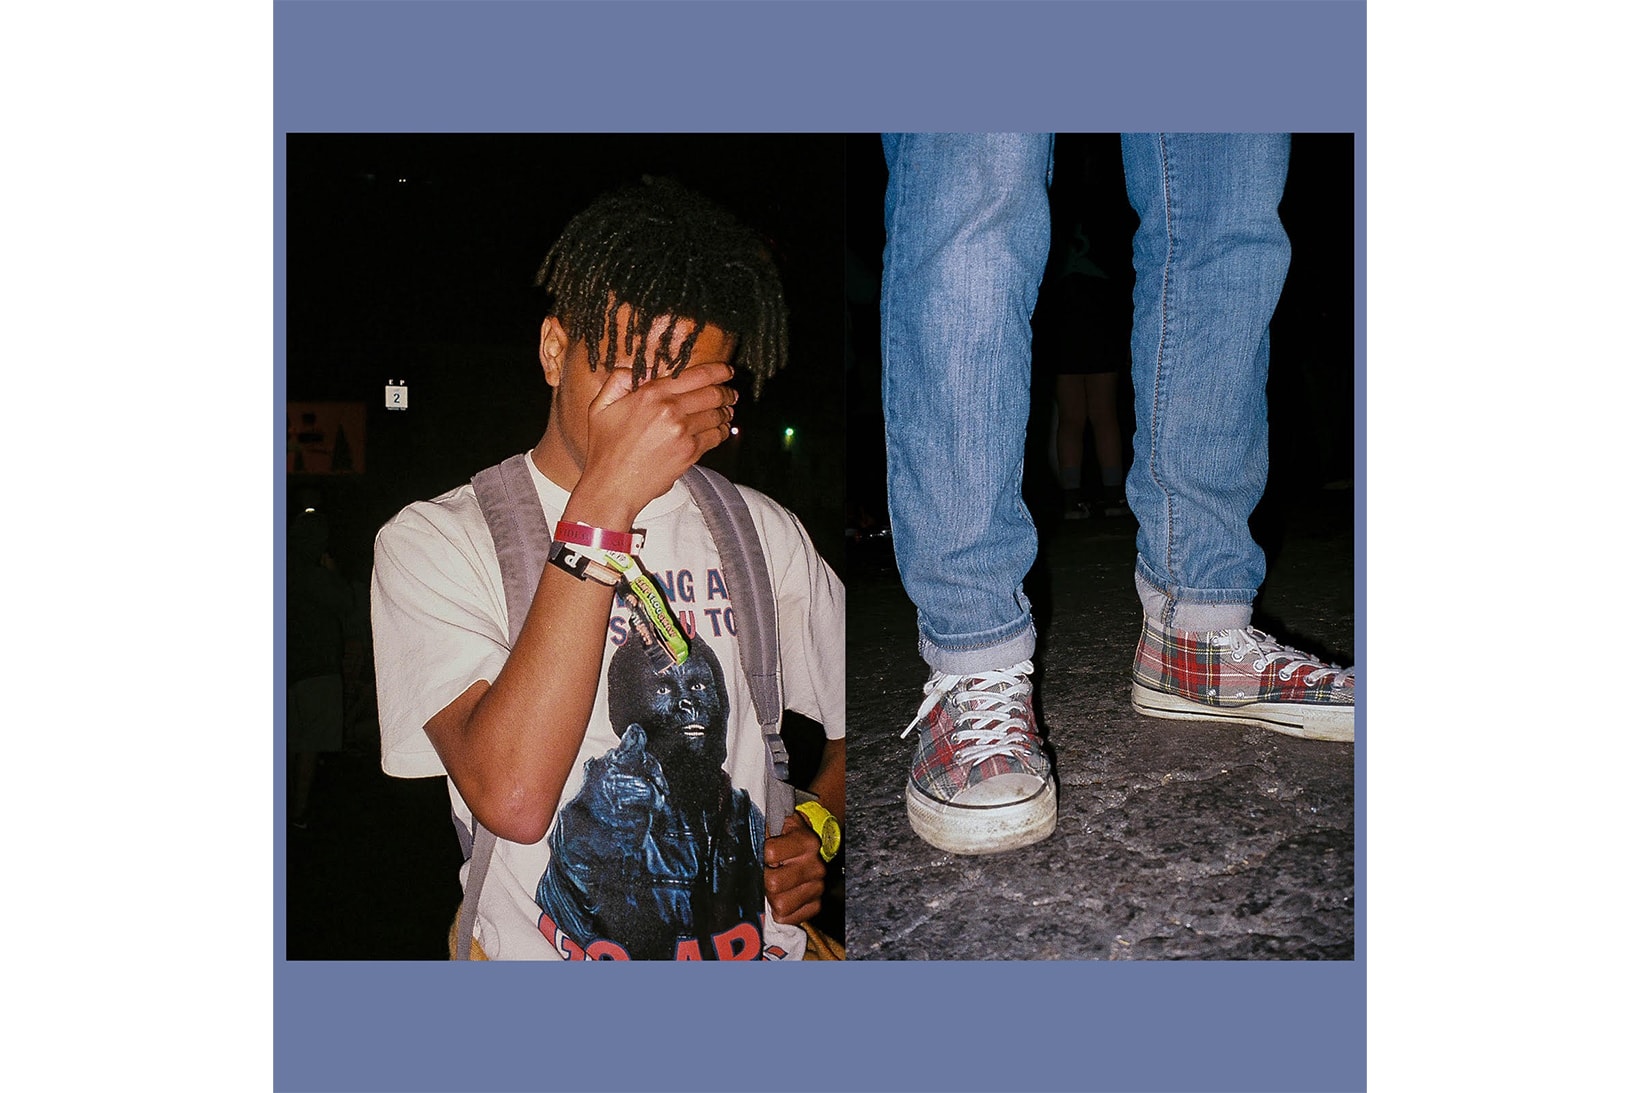 ROOFTOP FEET Editorial Part 1 Steve Lacey Playboi Carti Lil Yachty